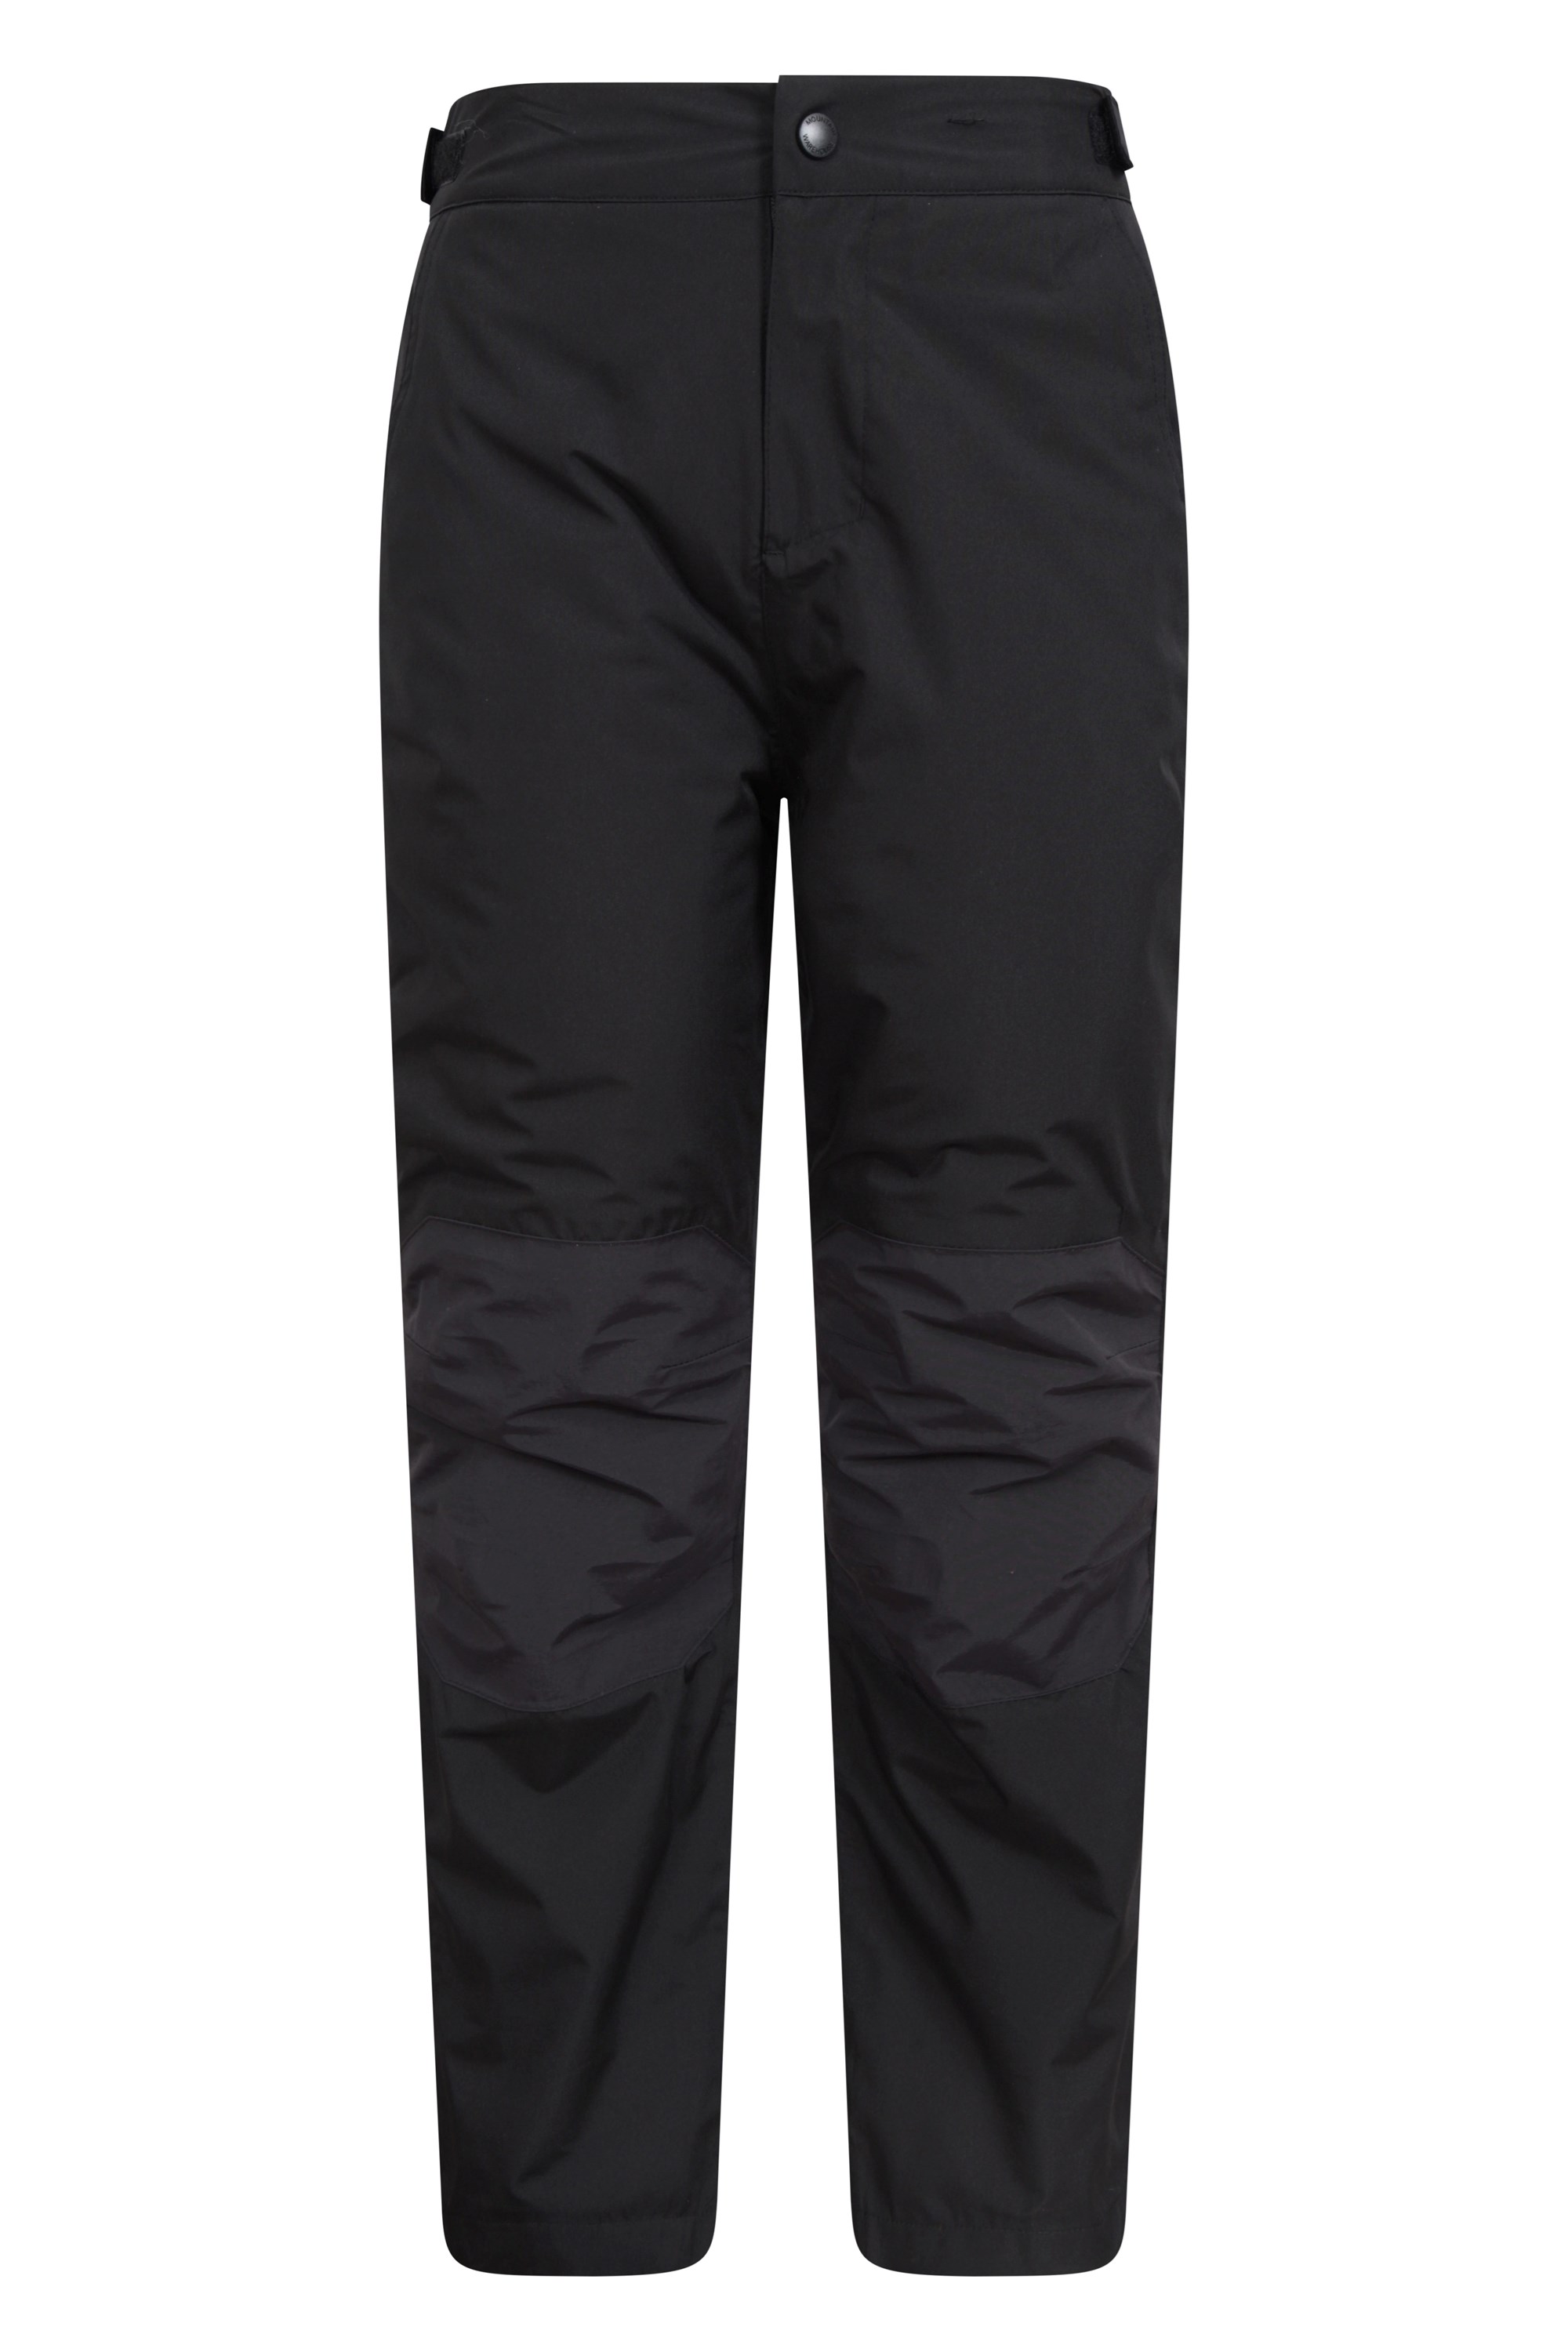 Trekking trousers and allweather trousers  Men and women